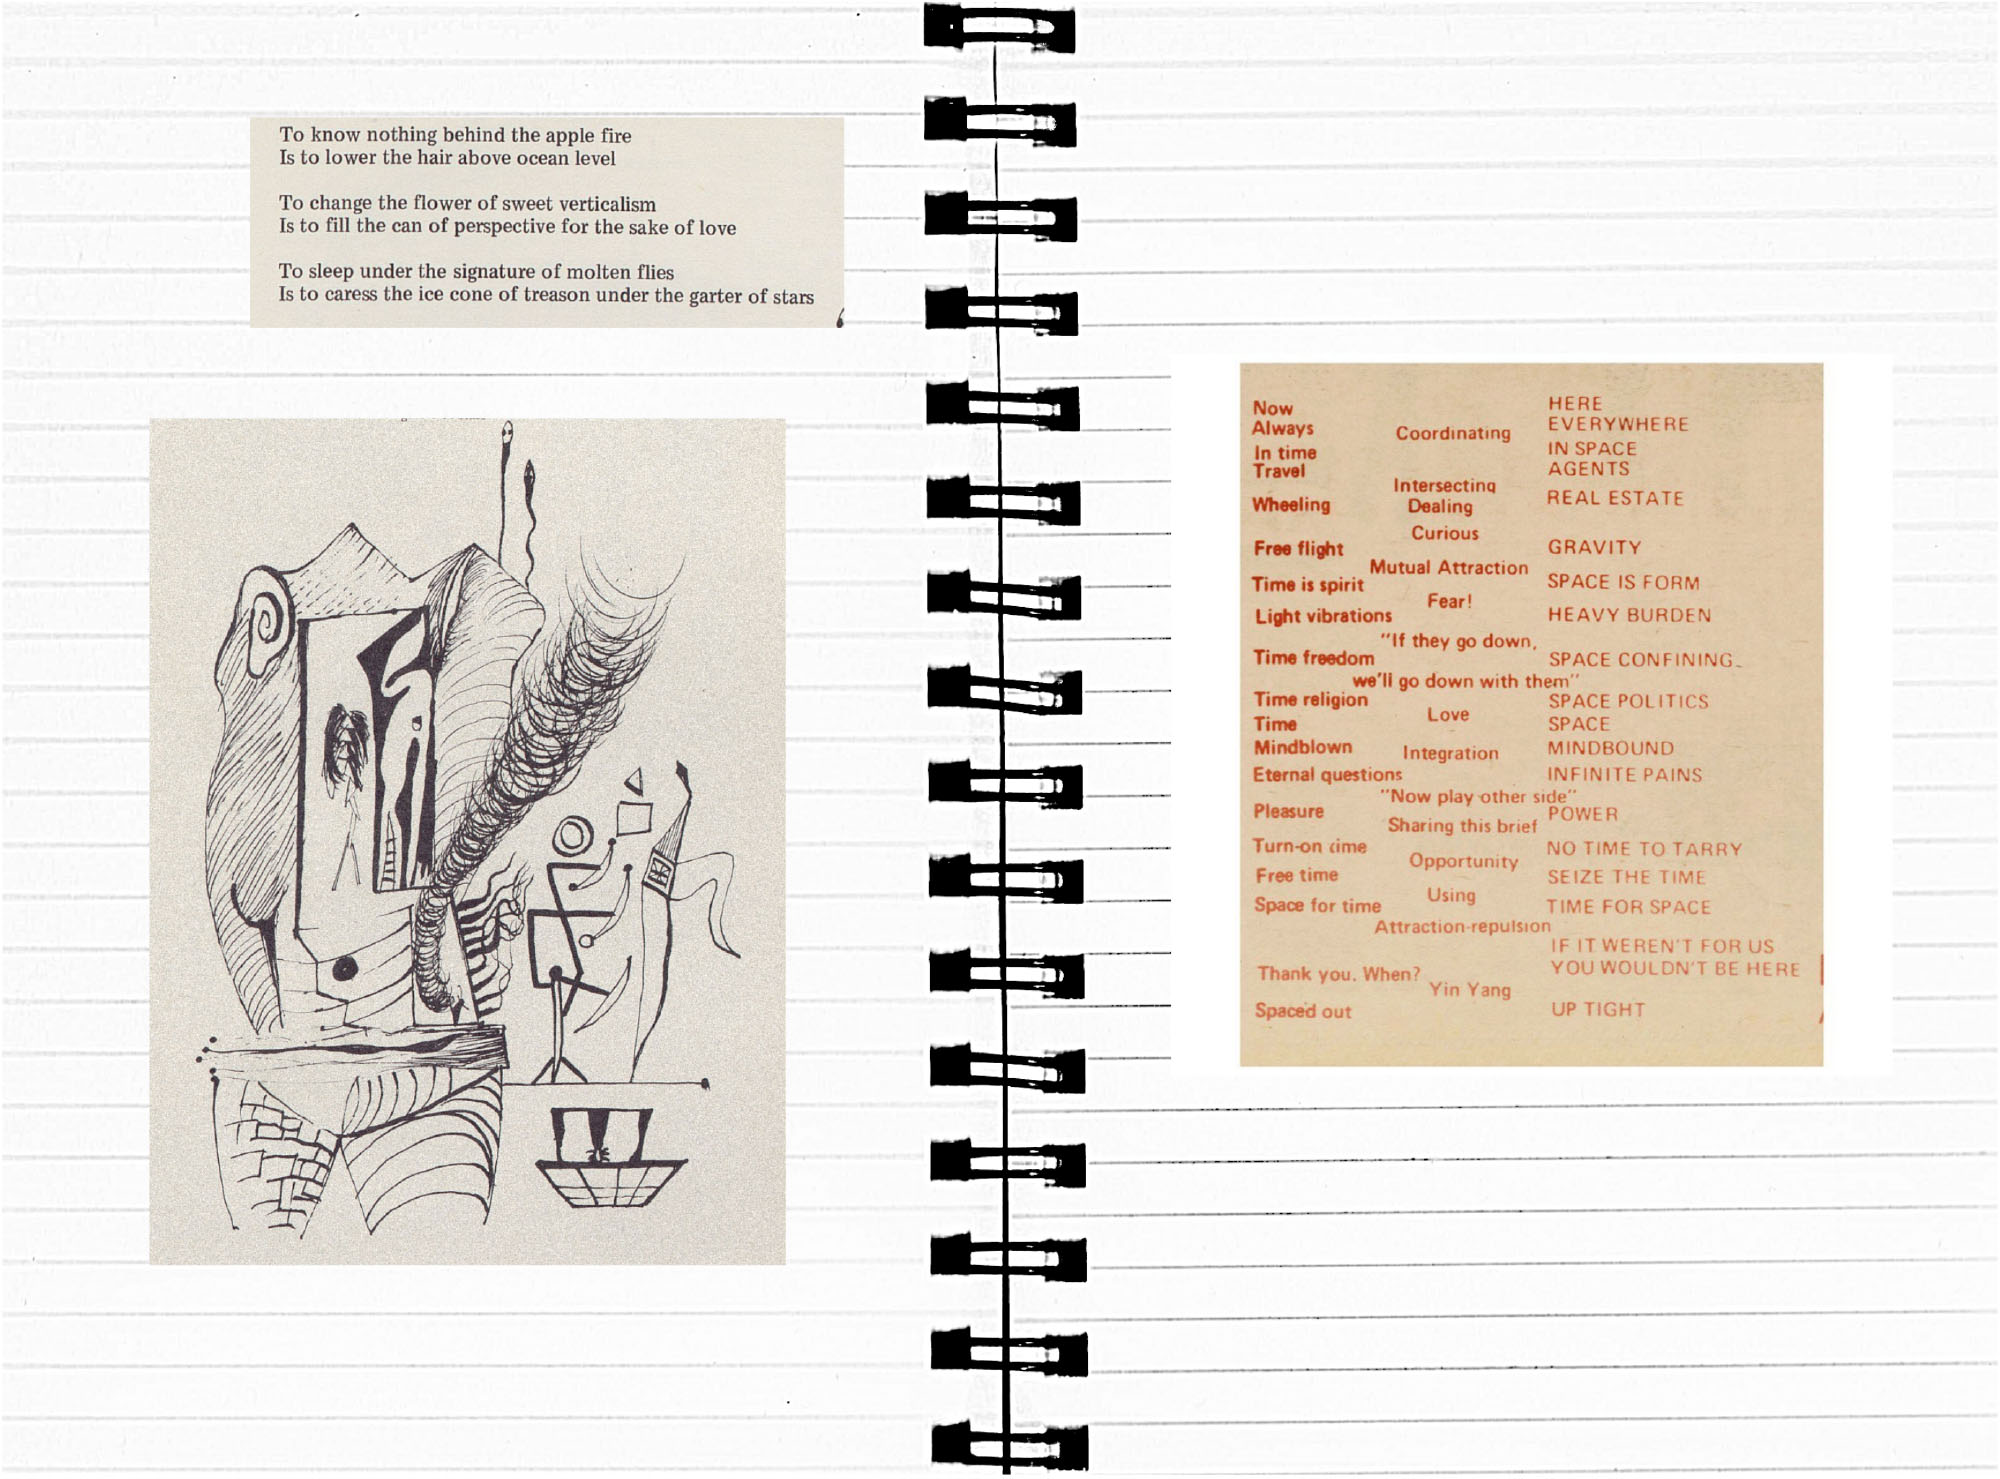 exmouth_scrapbook_notes_on_utopia_final_version-17